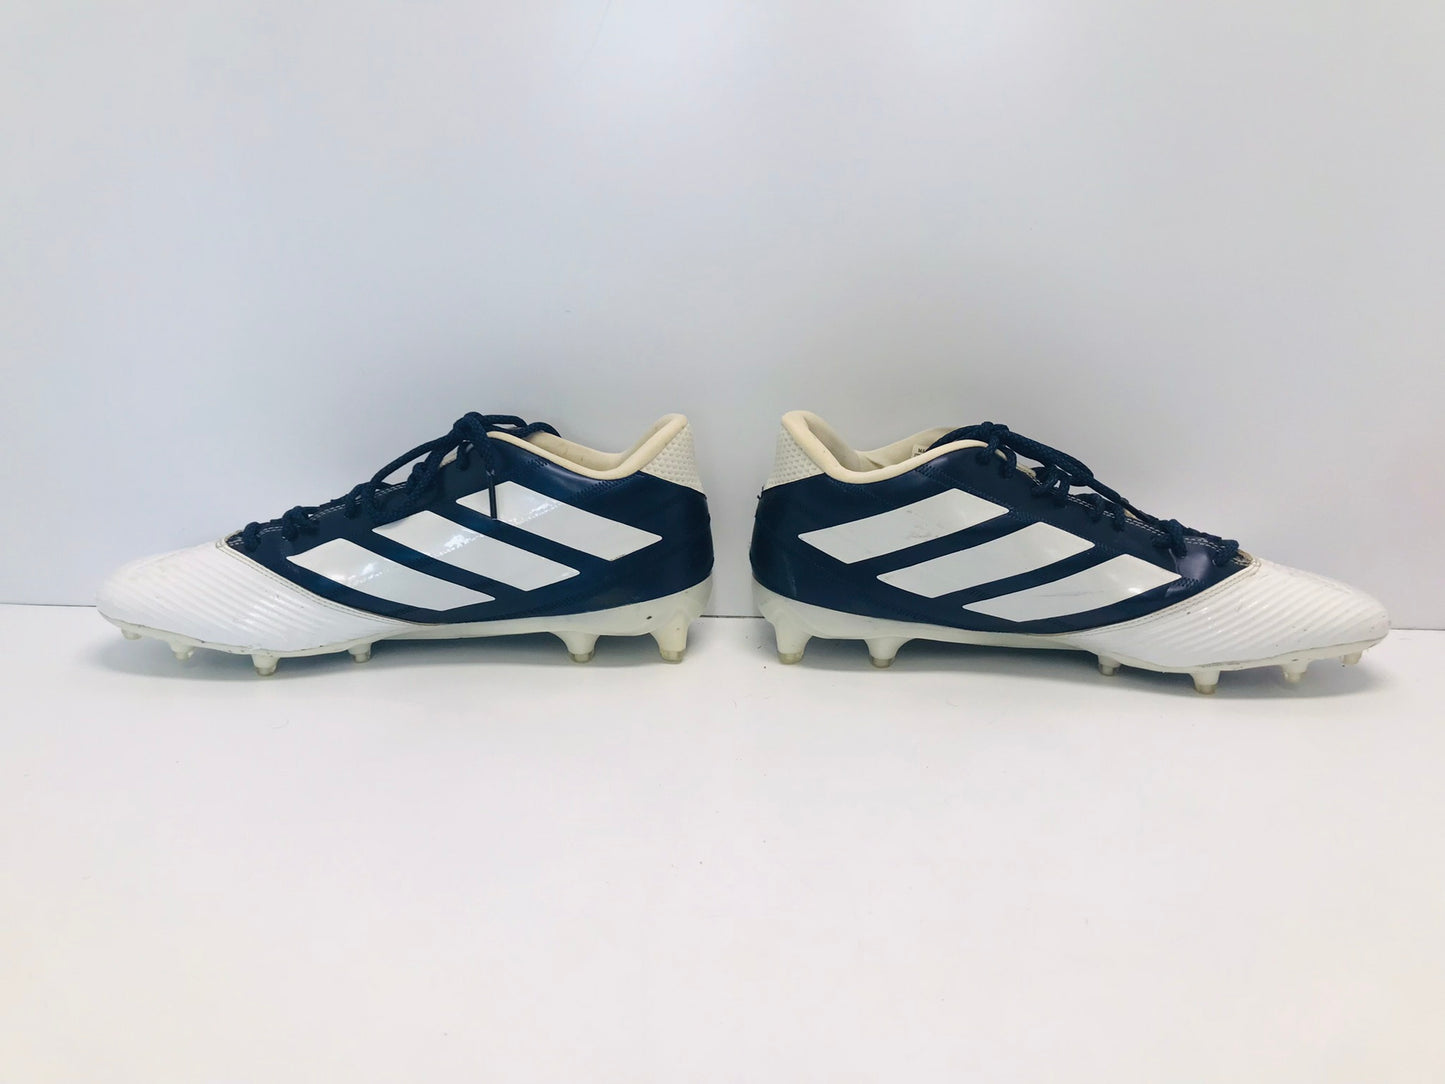 Soccer Shoes Cleats Men's Size 14 Adidas Freak Navy White Like New